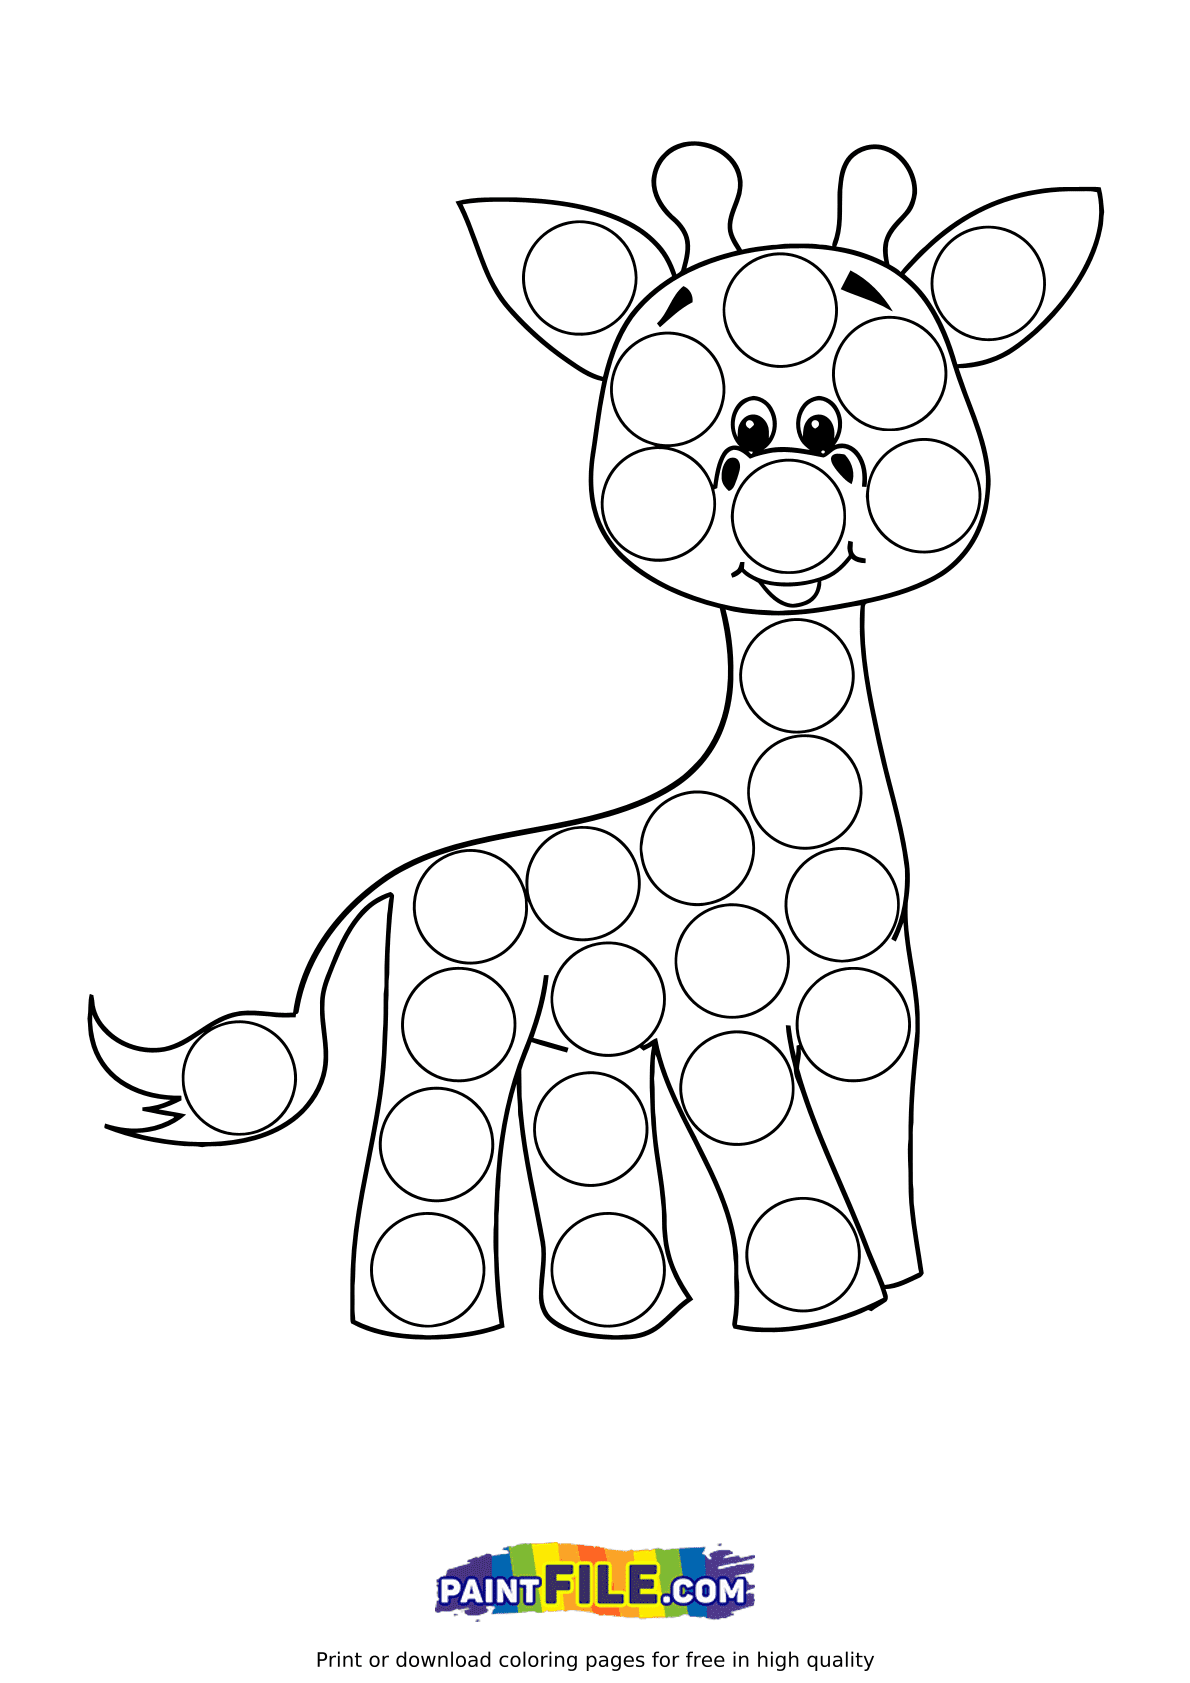 Pop it Girafe Coloring Page